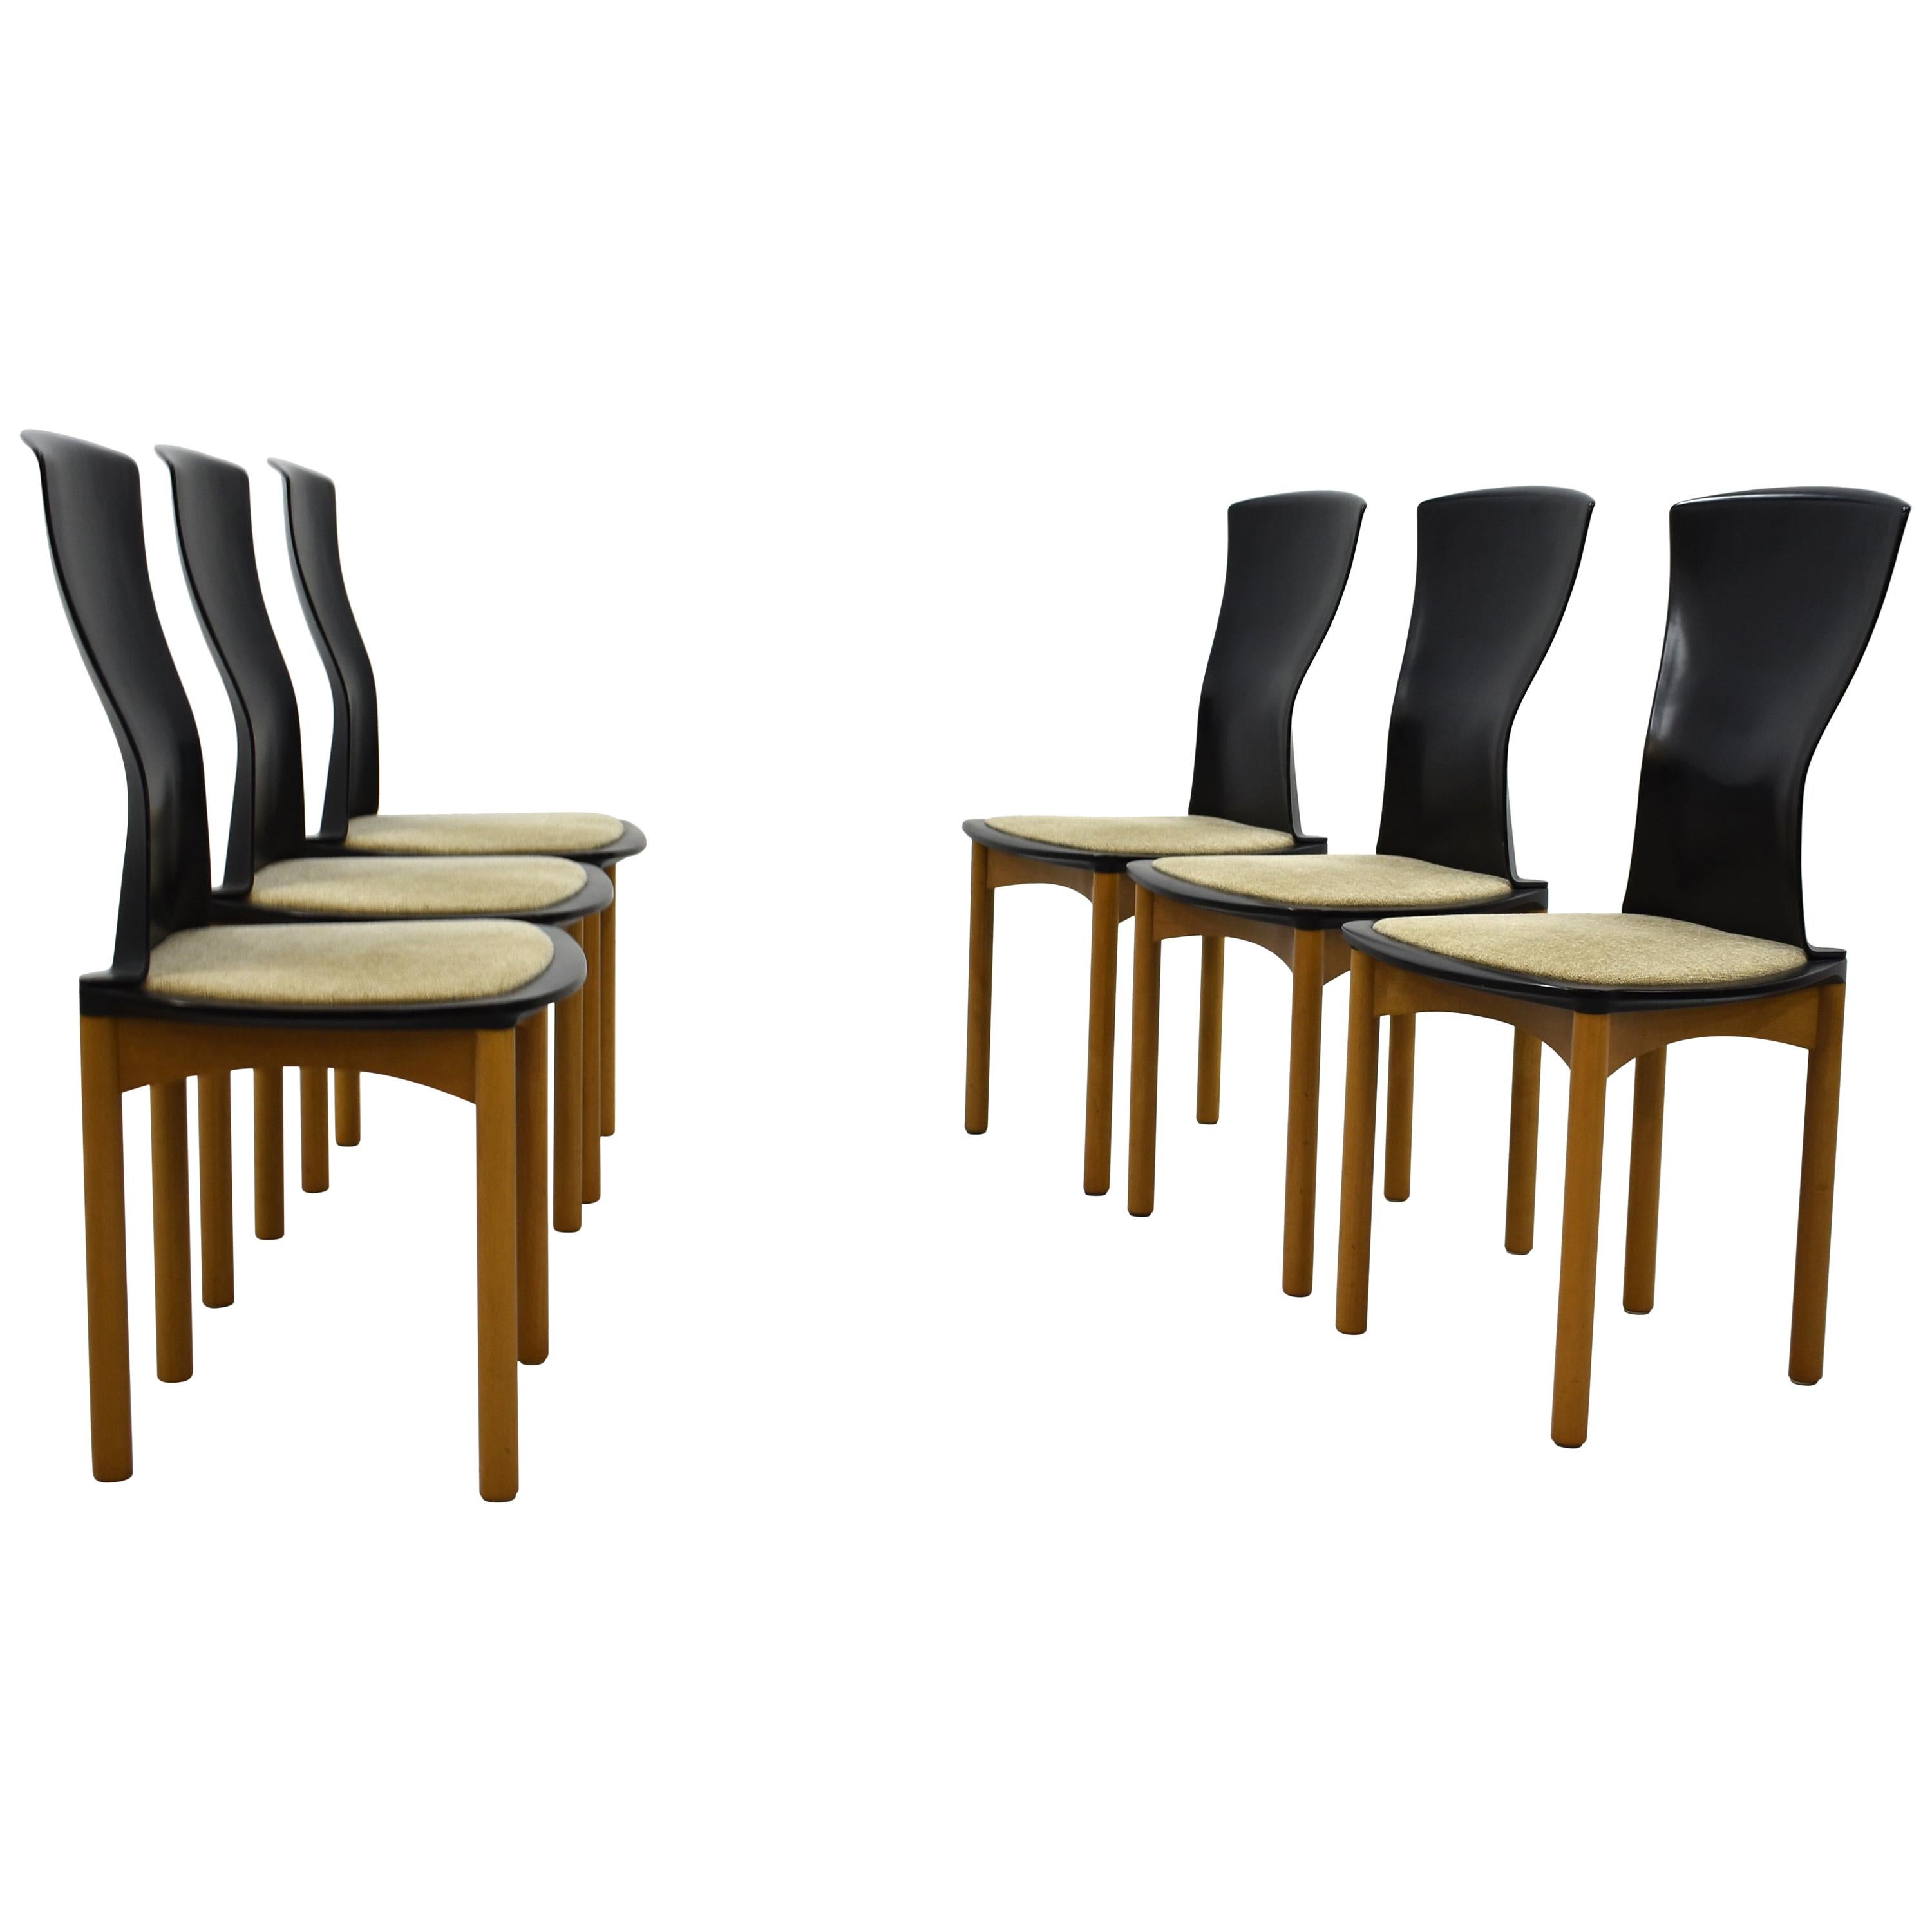 Set of 6 Dining Chairs Designed by Francesco Binfaré for Cassina, Italy, 1980s